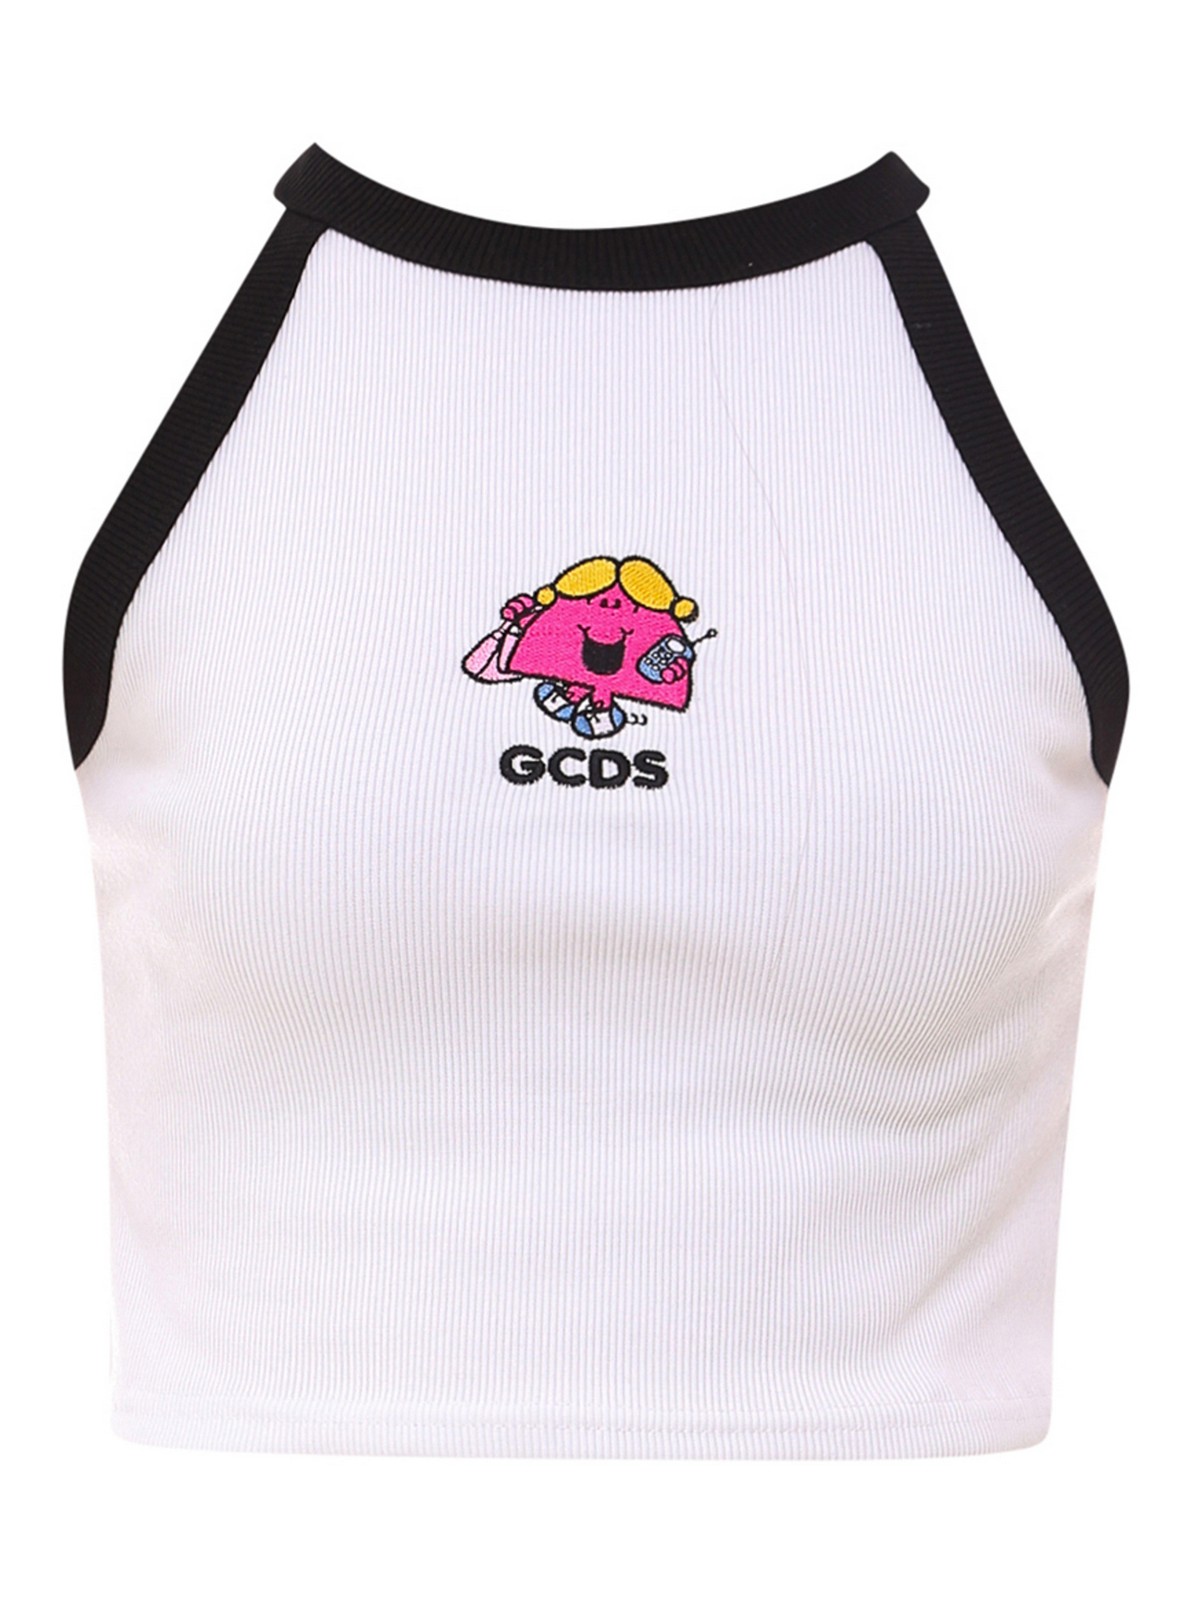 GCDS EMBROIDERED LOGO CROPPED TOP